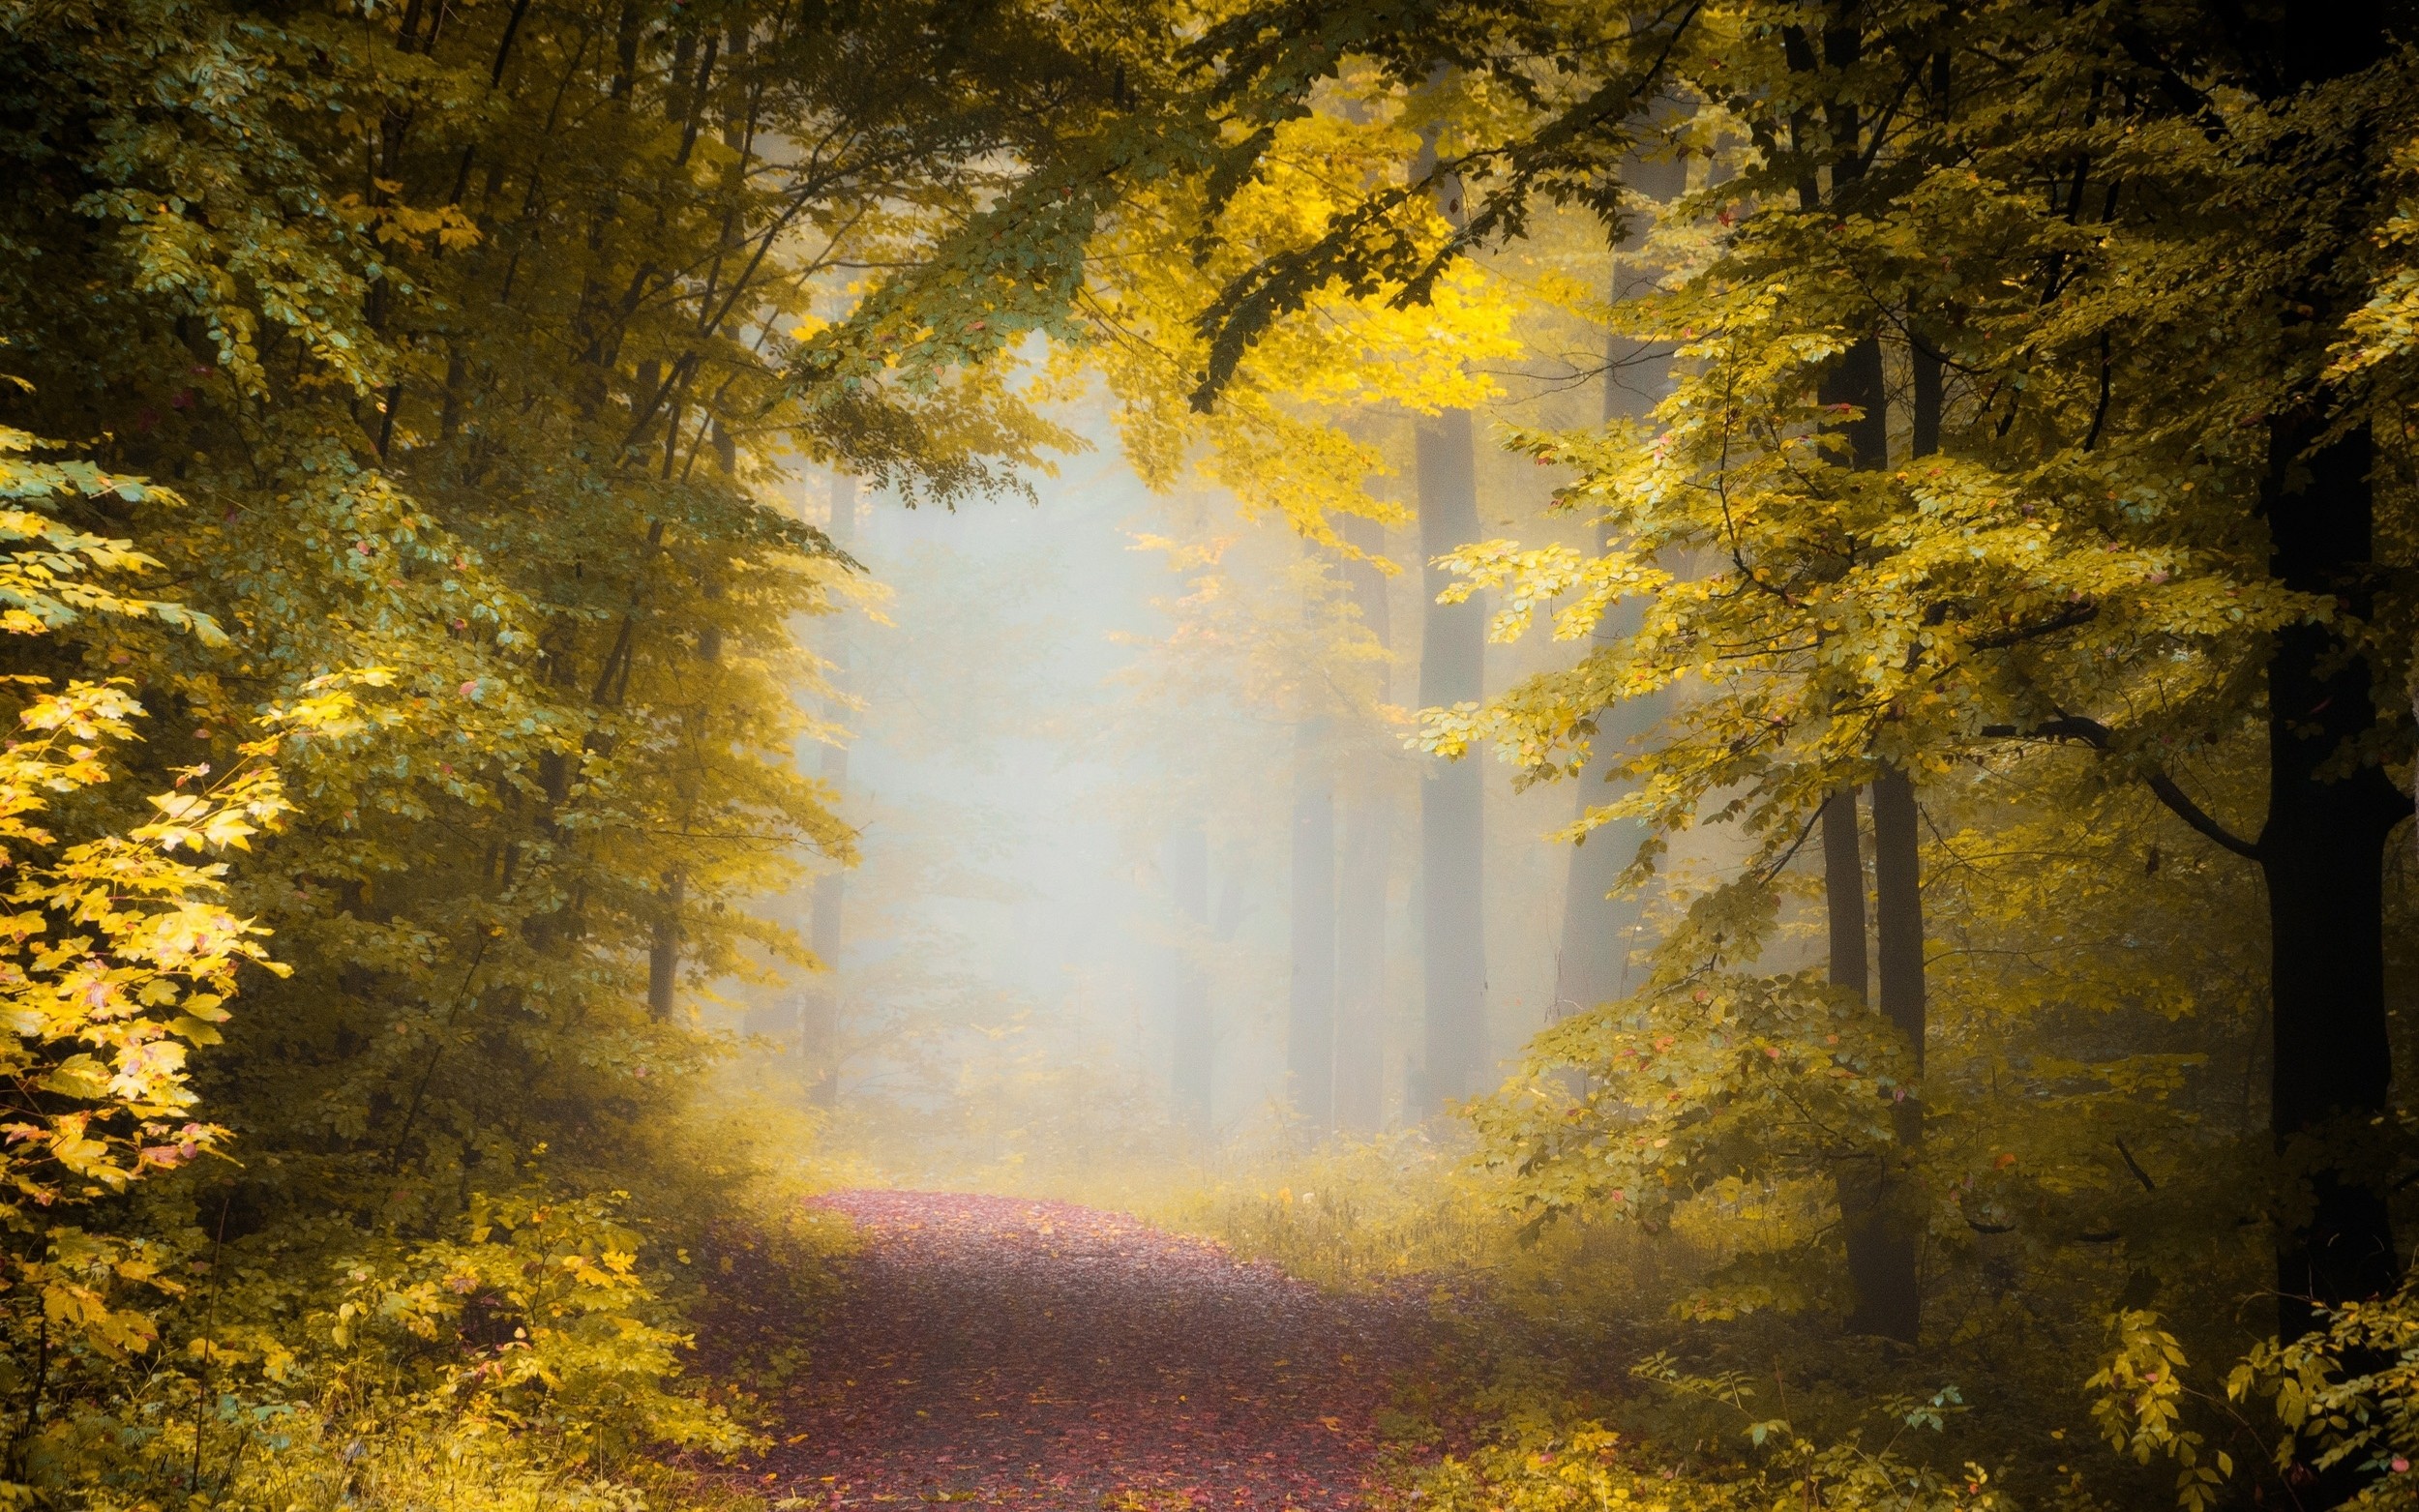 General 2500x1563 nature fall path forest mist morning trees leaves sunlight